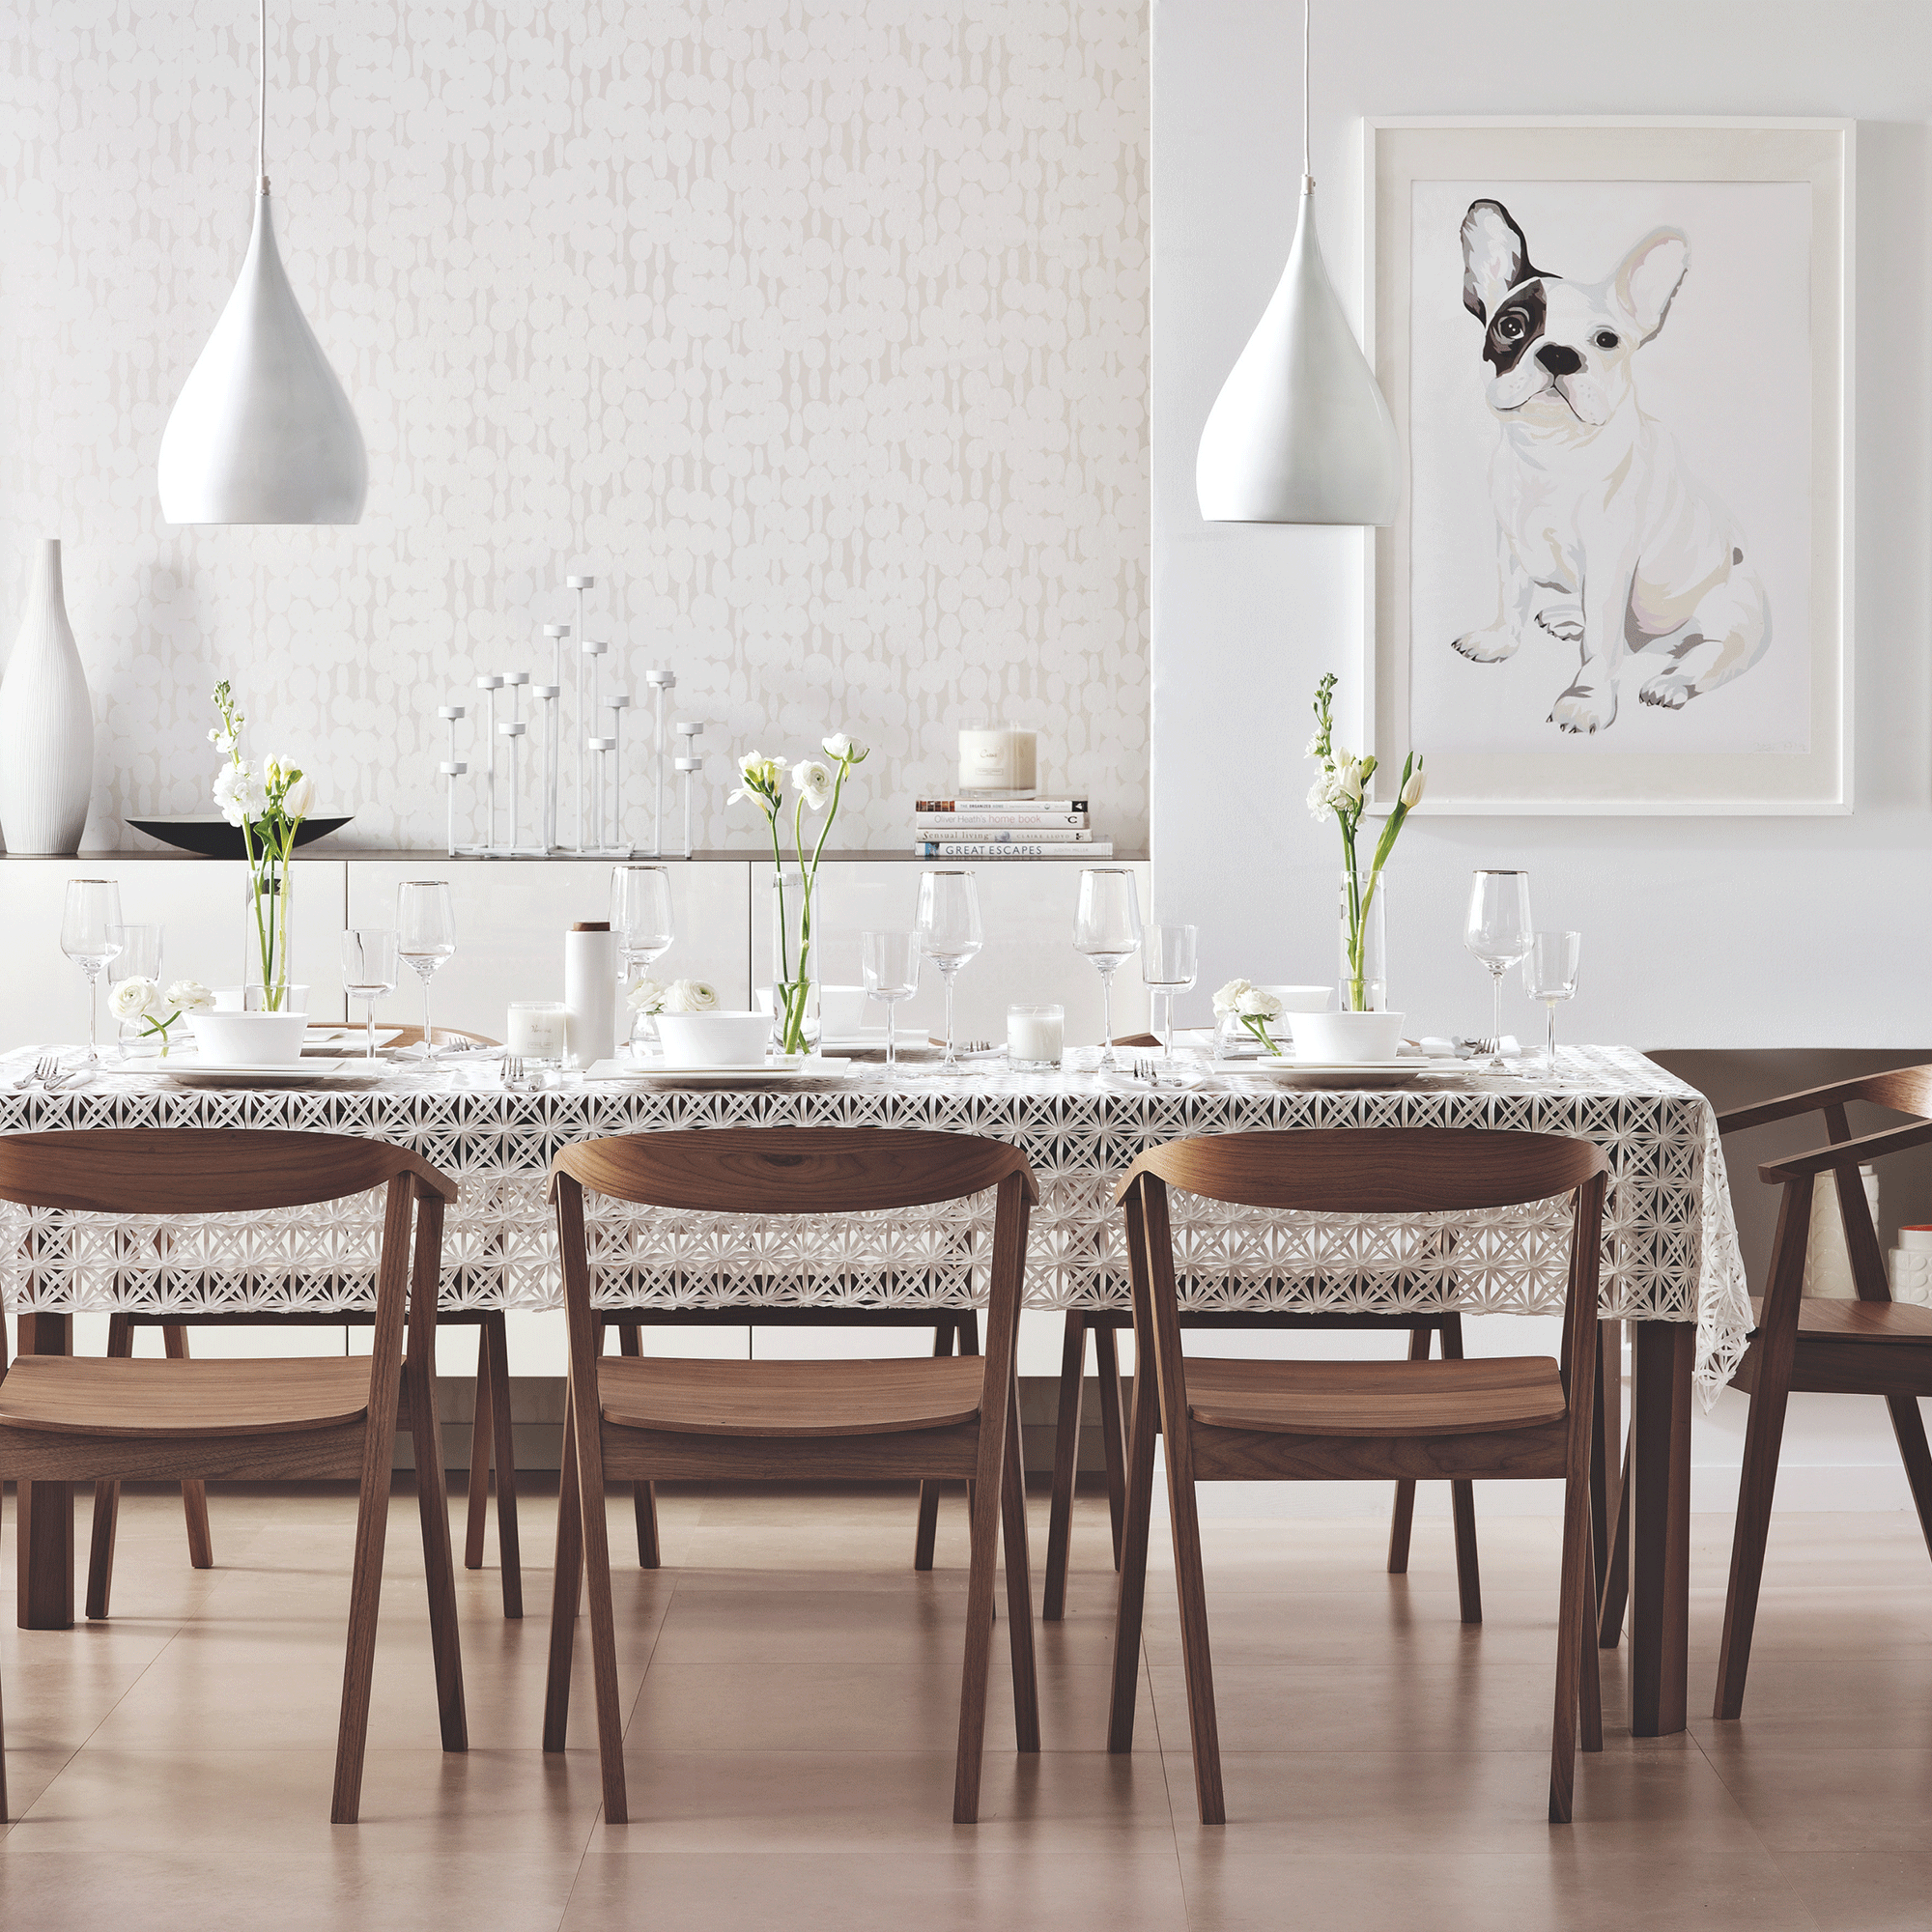 White walls with wooden table and chairs